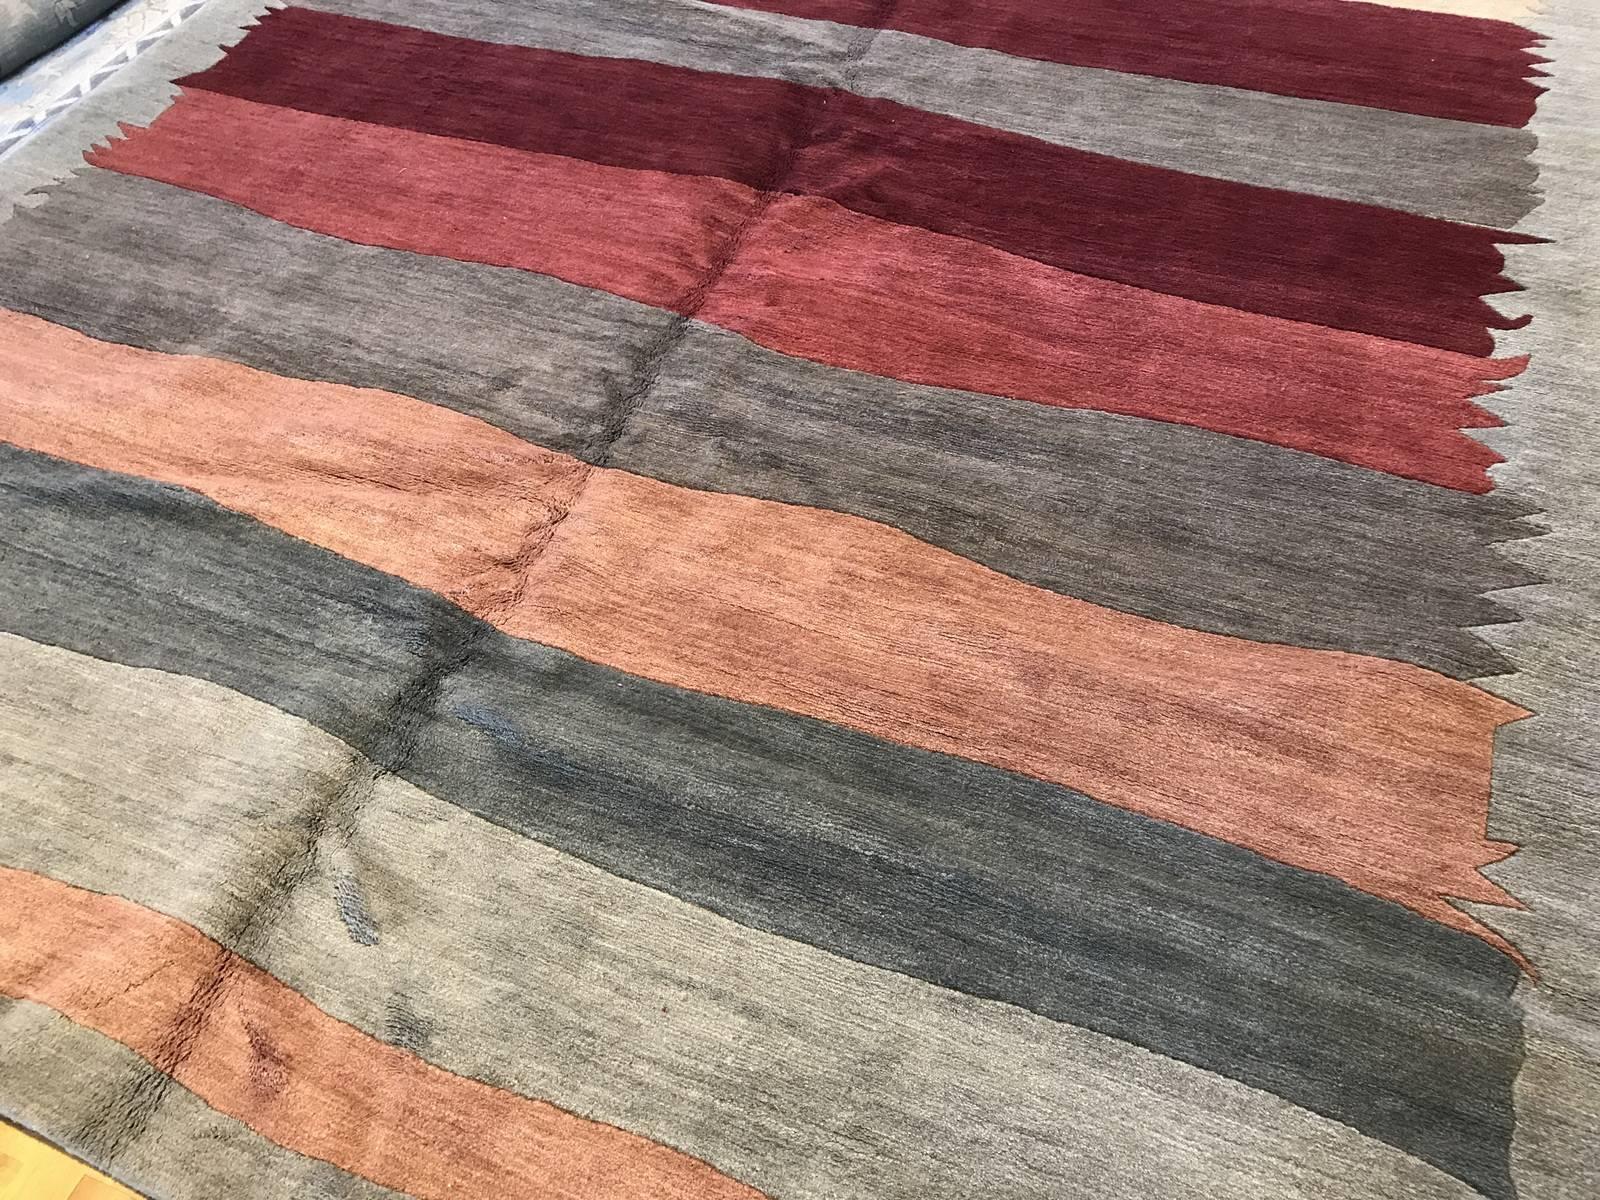 Multi-color Stripe rug
Colors: Reds, blues, golds, greens, taupe, beige, brown, grey.